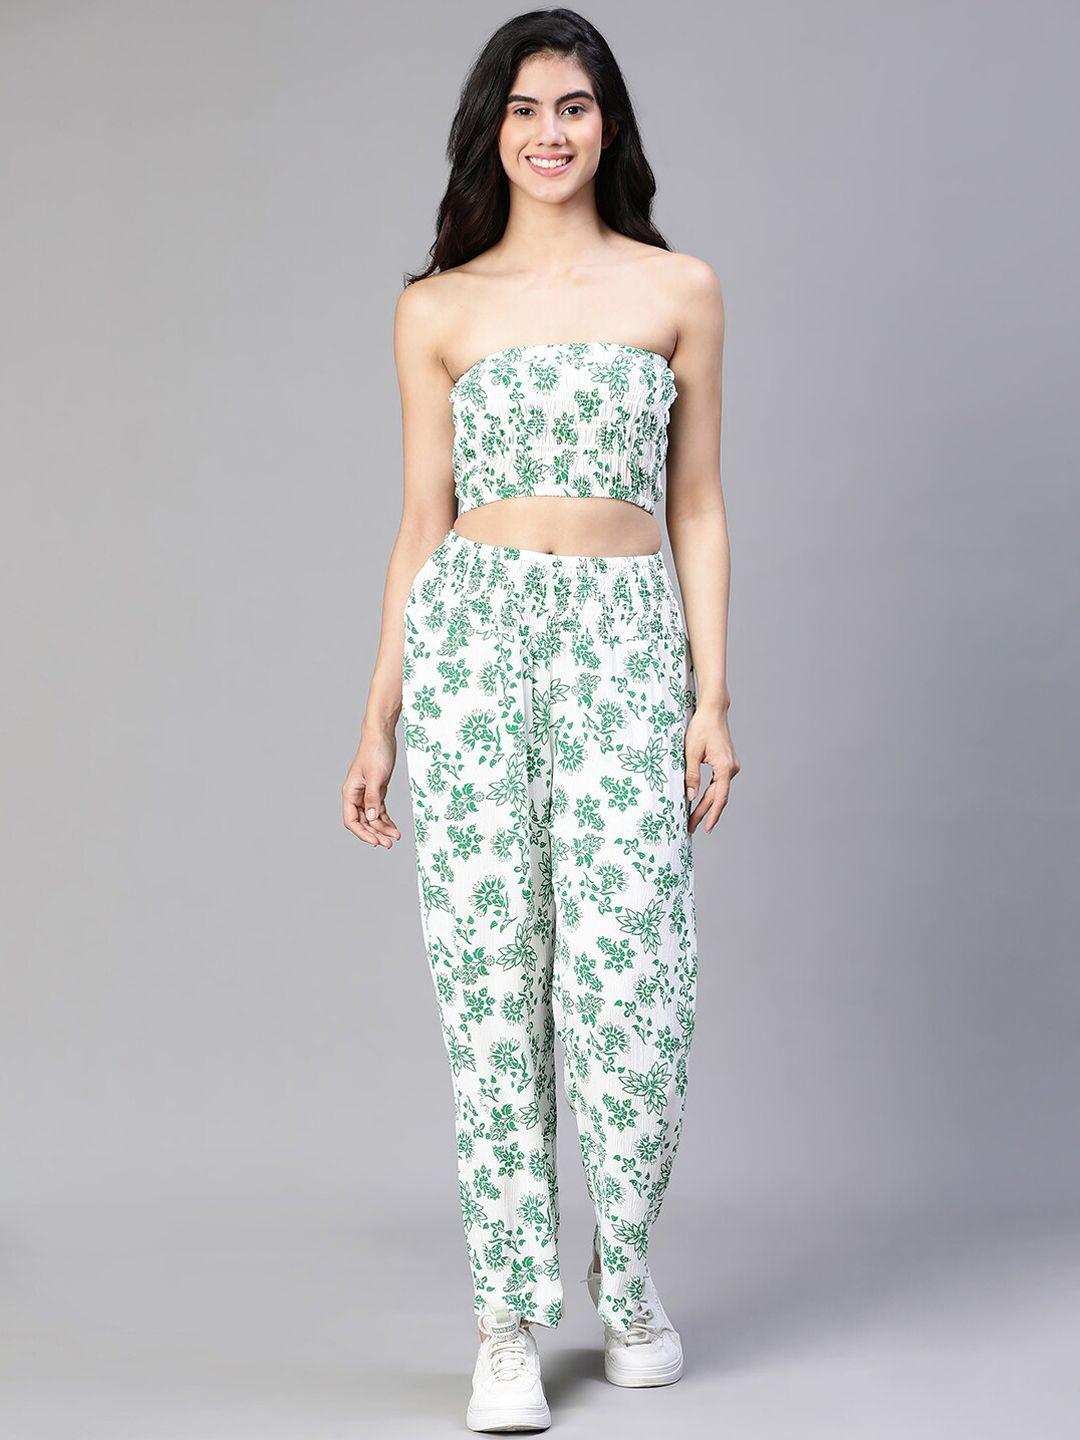 oxolloxo floral printed strapless crop top with trousers